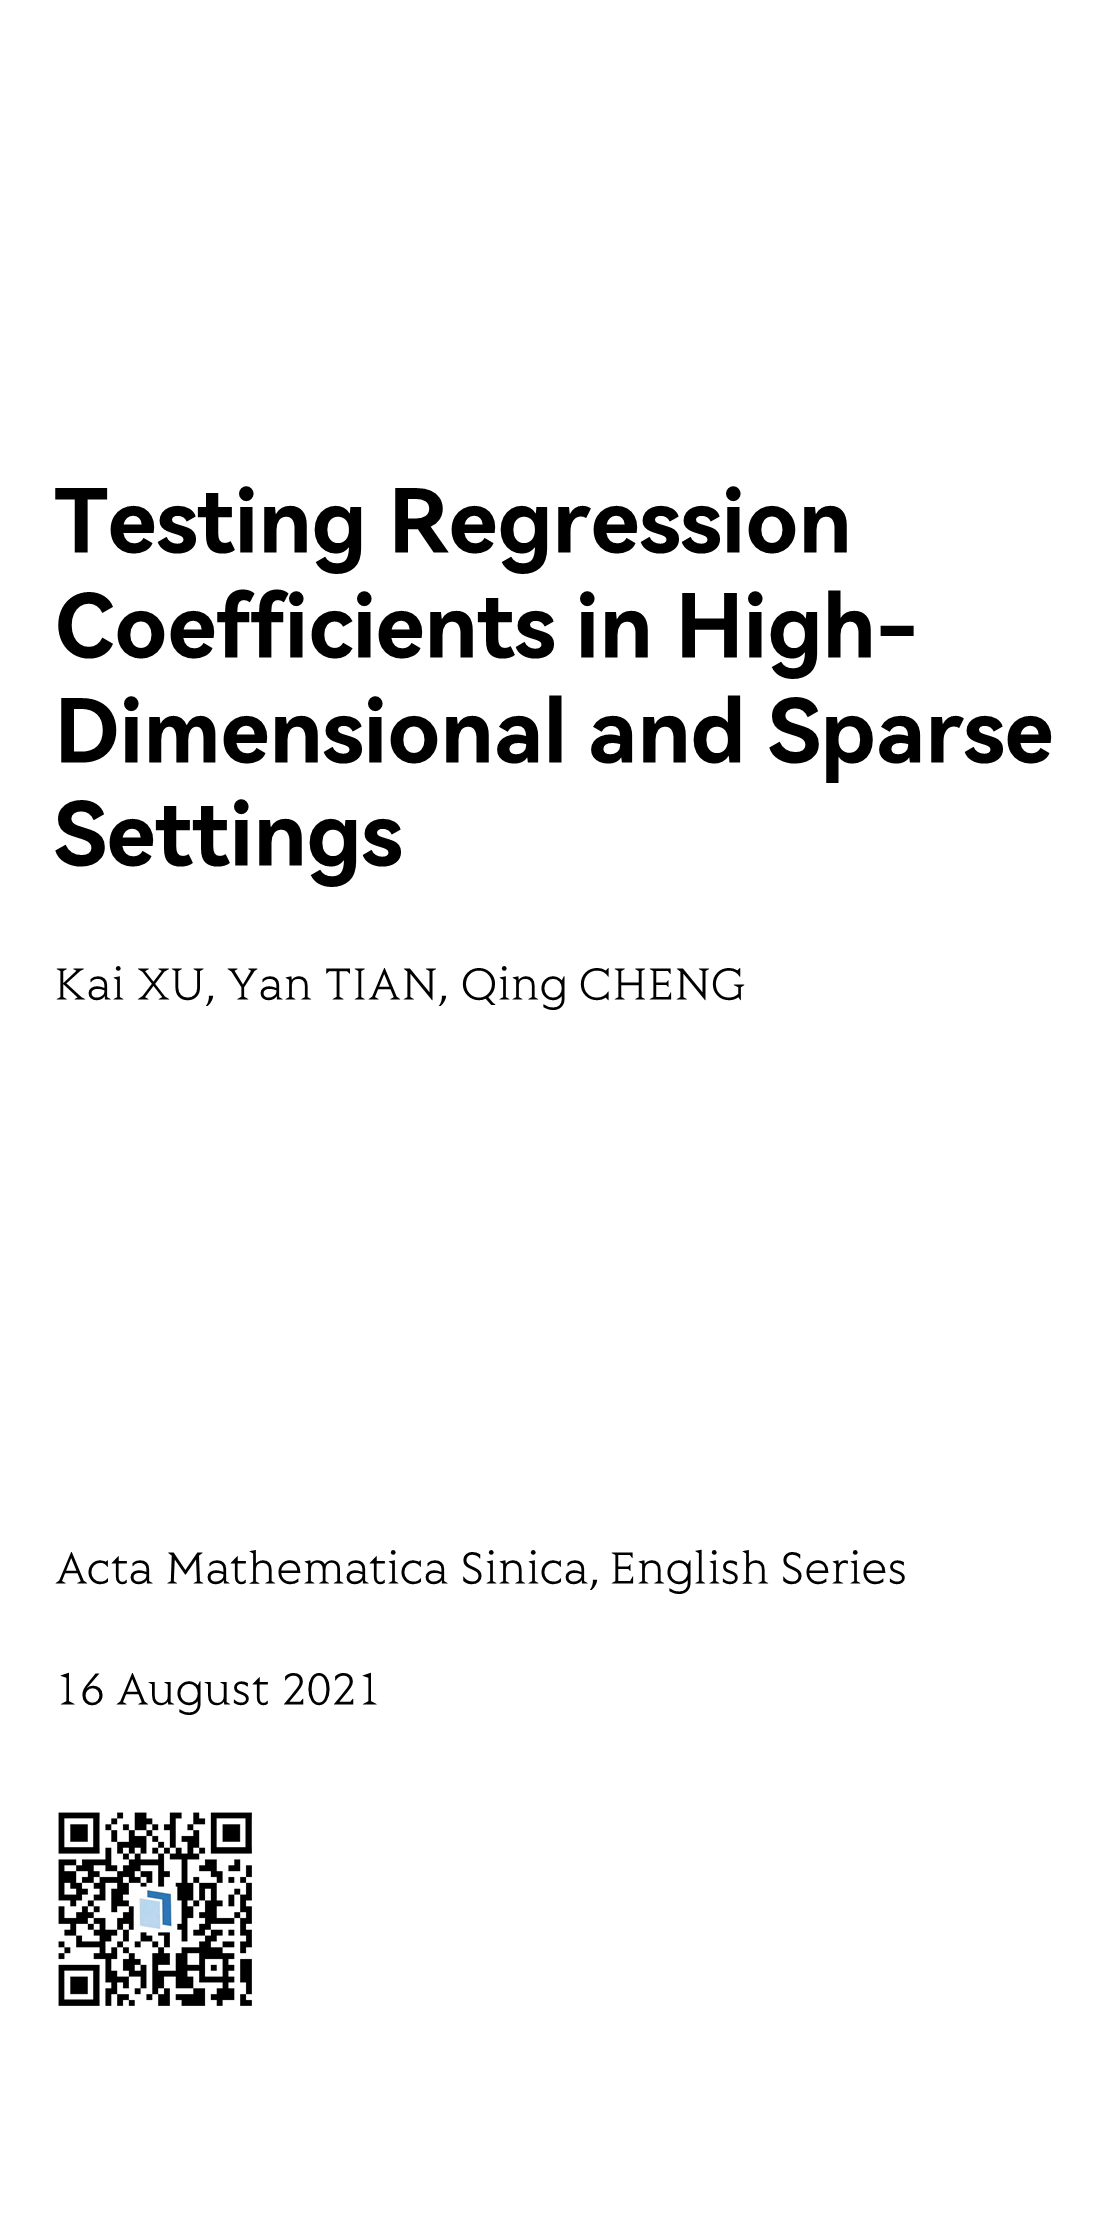 Testing Regression Coefficients in High-Dimensional and Sparse Settings_1